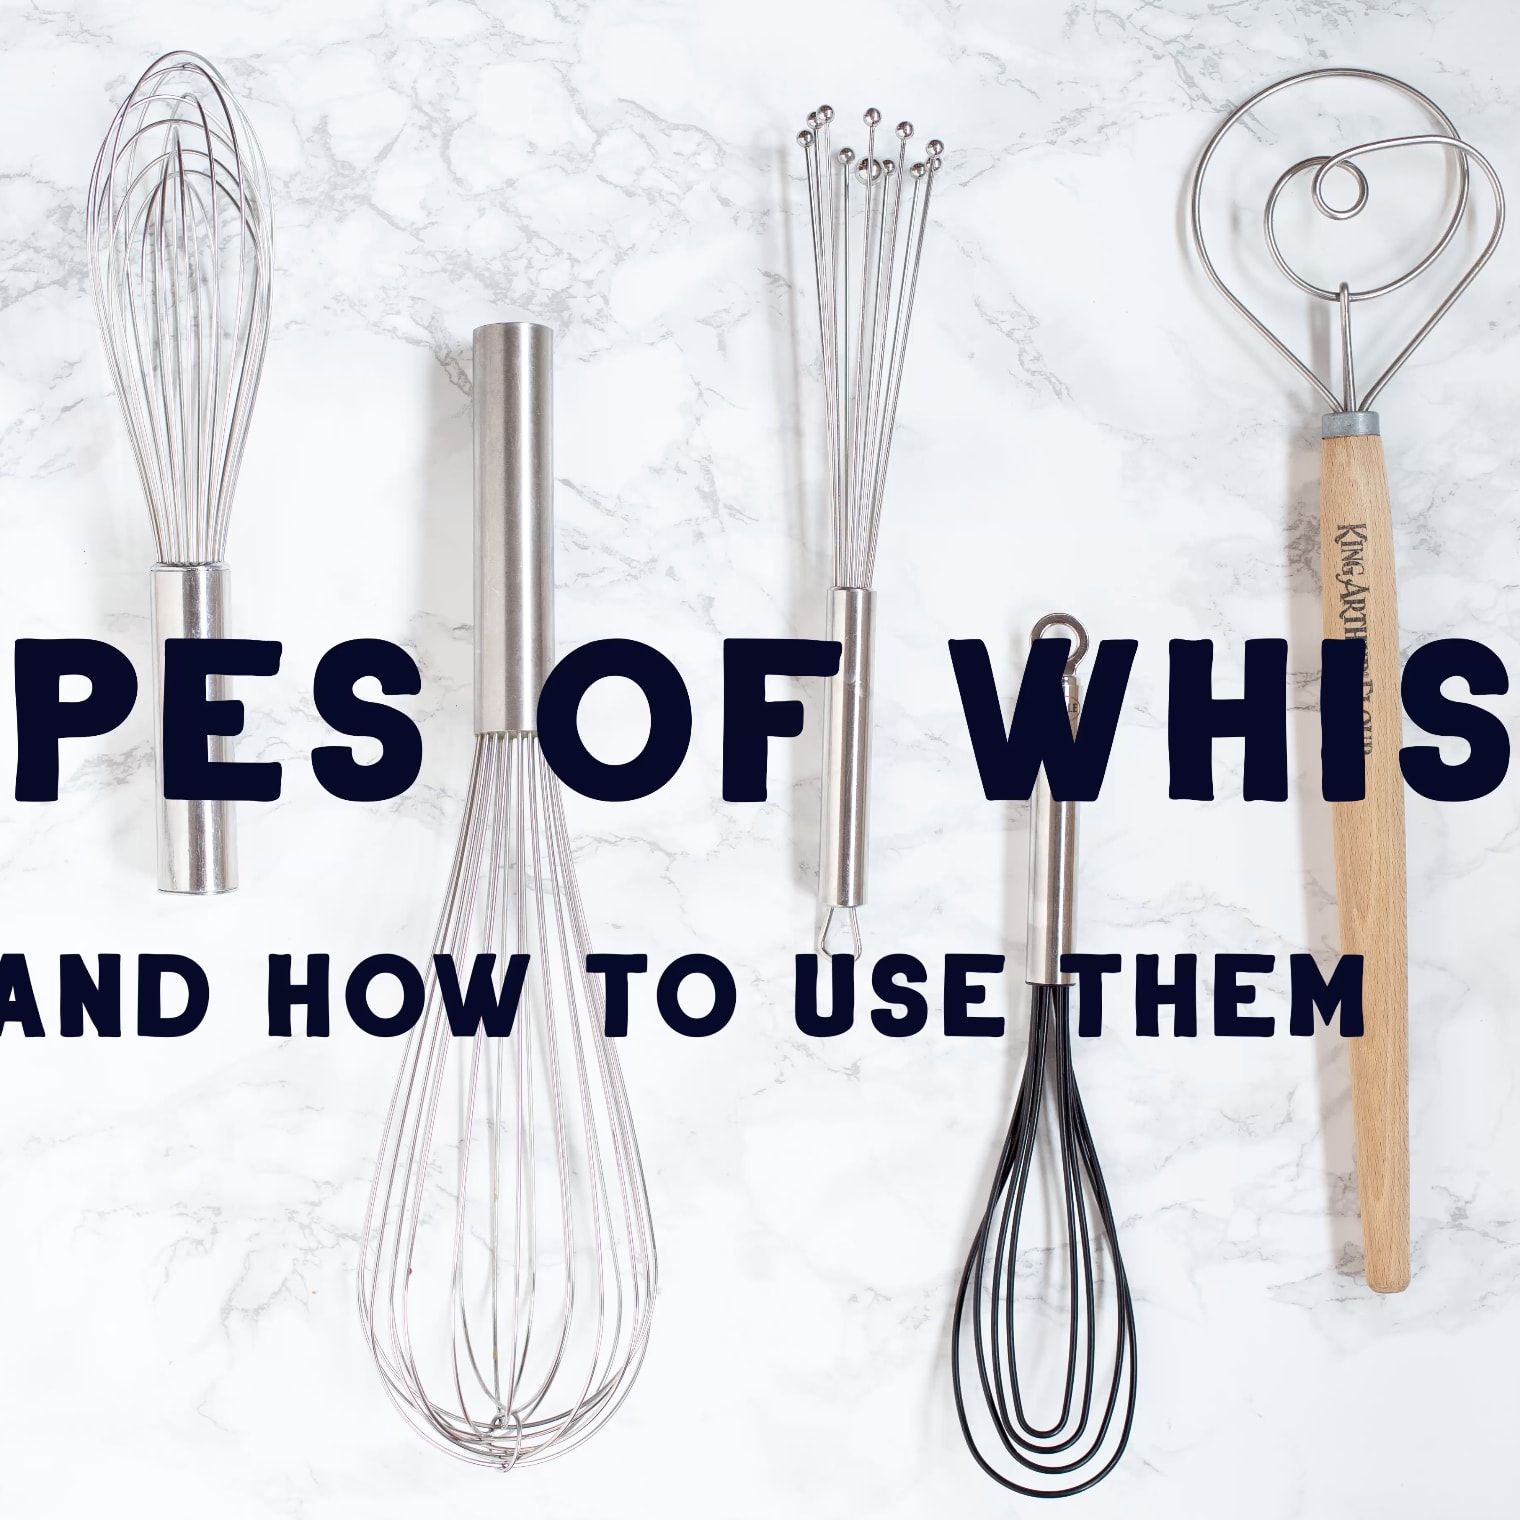 Flat Whisks are perfect for Making your Favorite Sauces - Creative